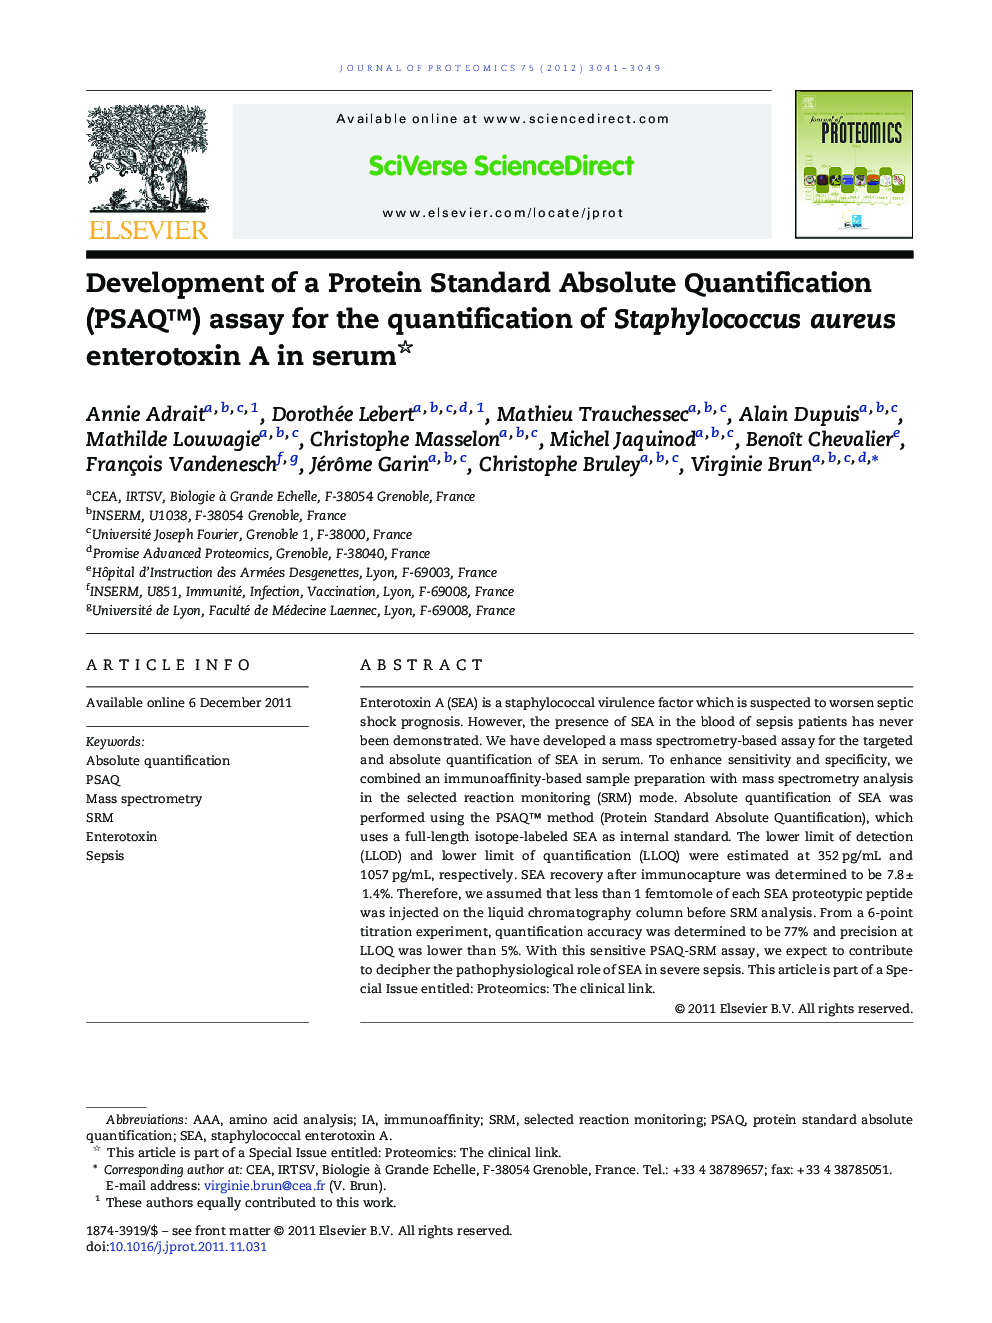 Development of a Protein Standard Absolute Quantification (PSAQ™) assay for the quantification of Staphylococcus aureus enterotoxin A in serum 